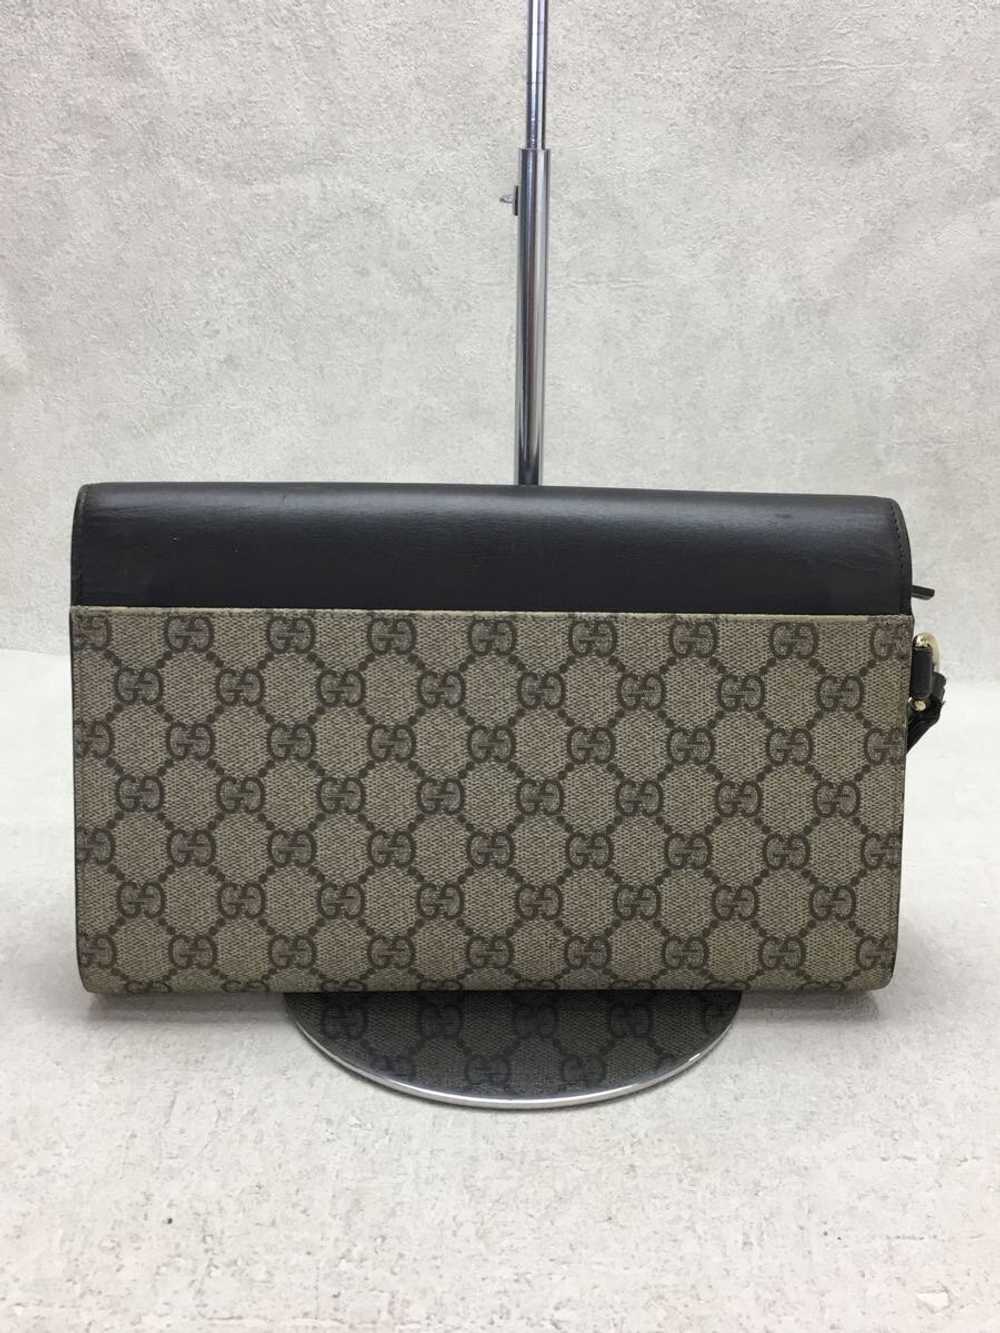 Used Gucci Scratches/Scratches/Dirty/Gg Supreme/C… - image 3